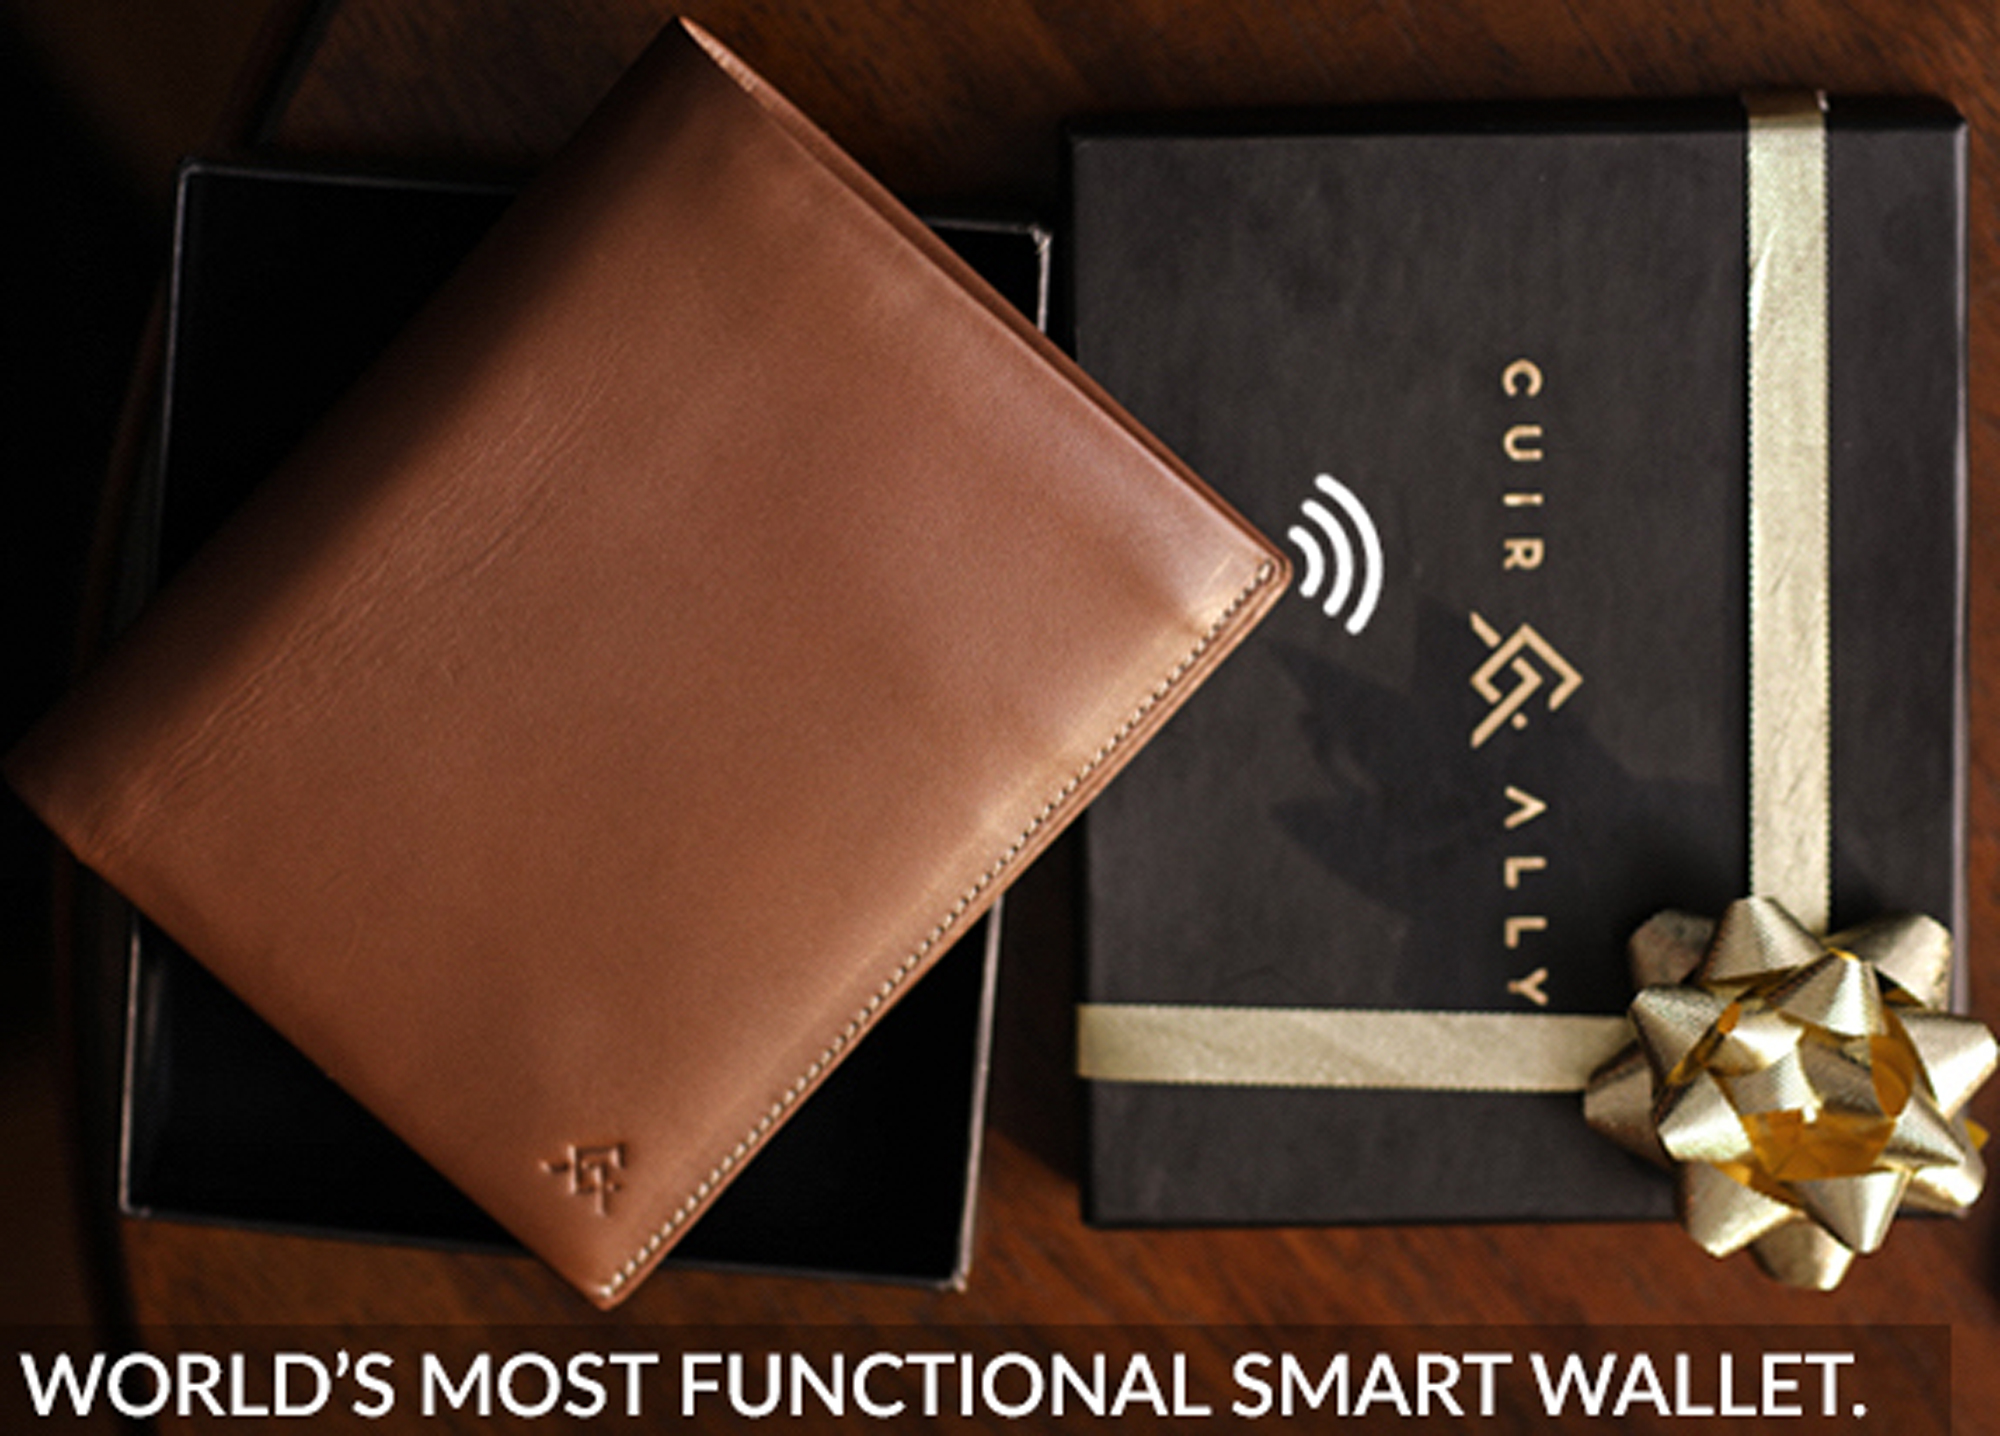 The World's Most Functional Smart Wallet - Voyager Smart by CUIR